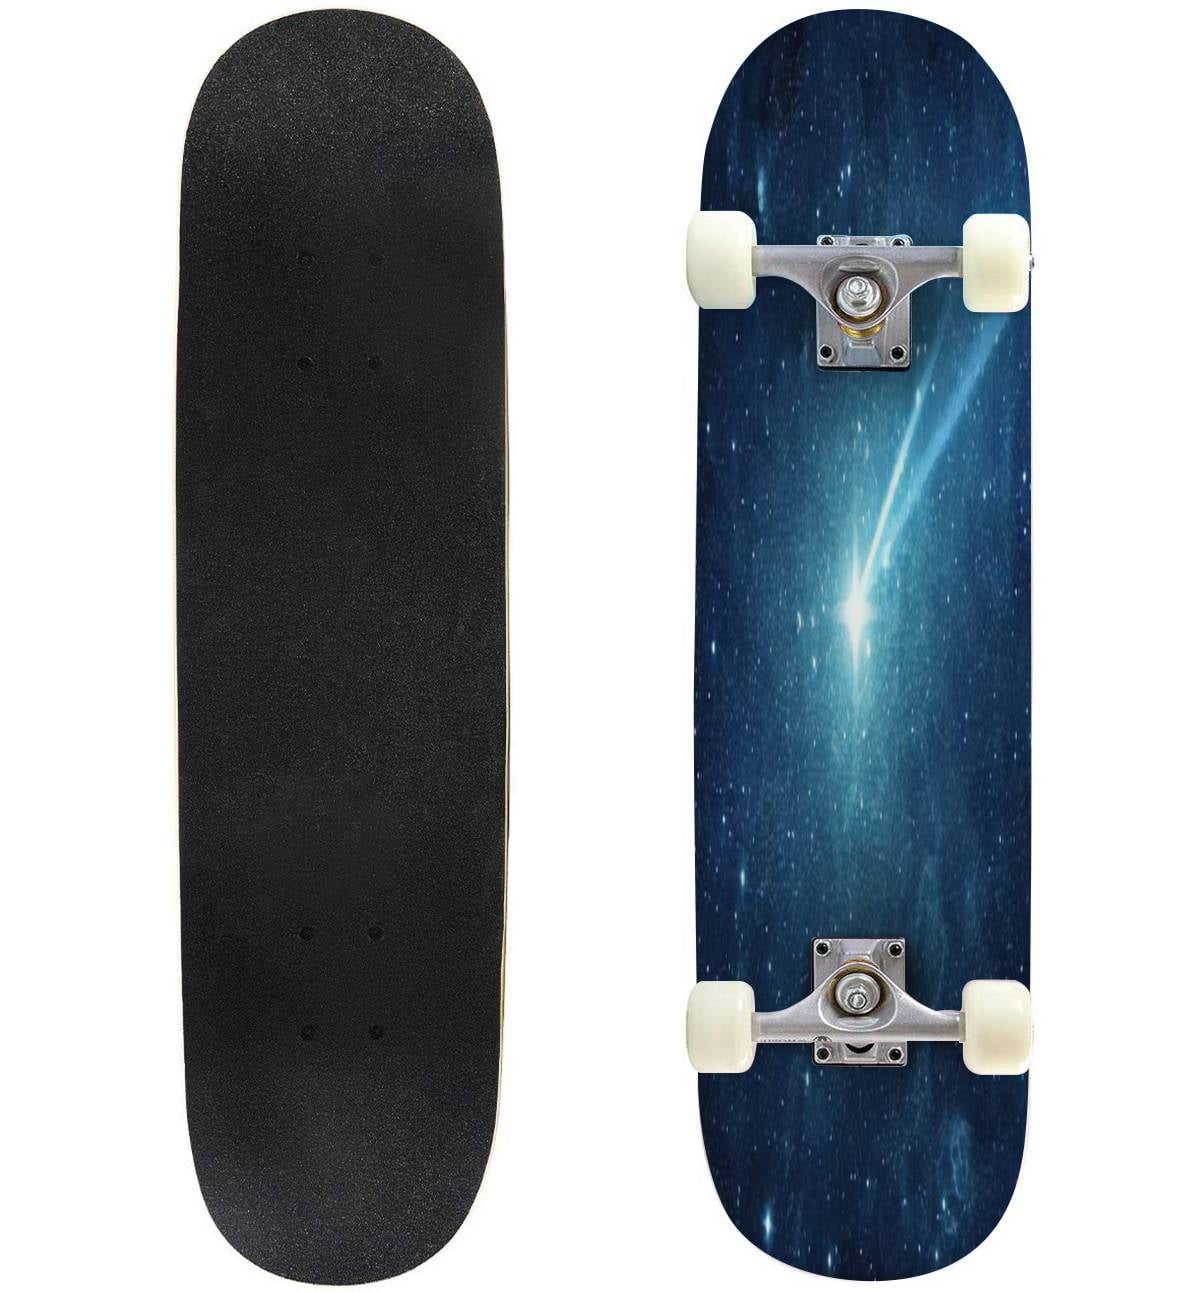 Falling meteorite asteroid comet the starry sky Elements of this Outdoor Skateboard Longboards 31"x8" Pro Complete Skate Board Cruiser - Walmart.com